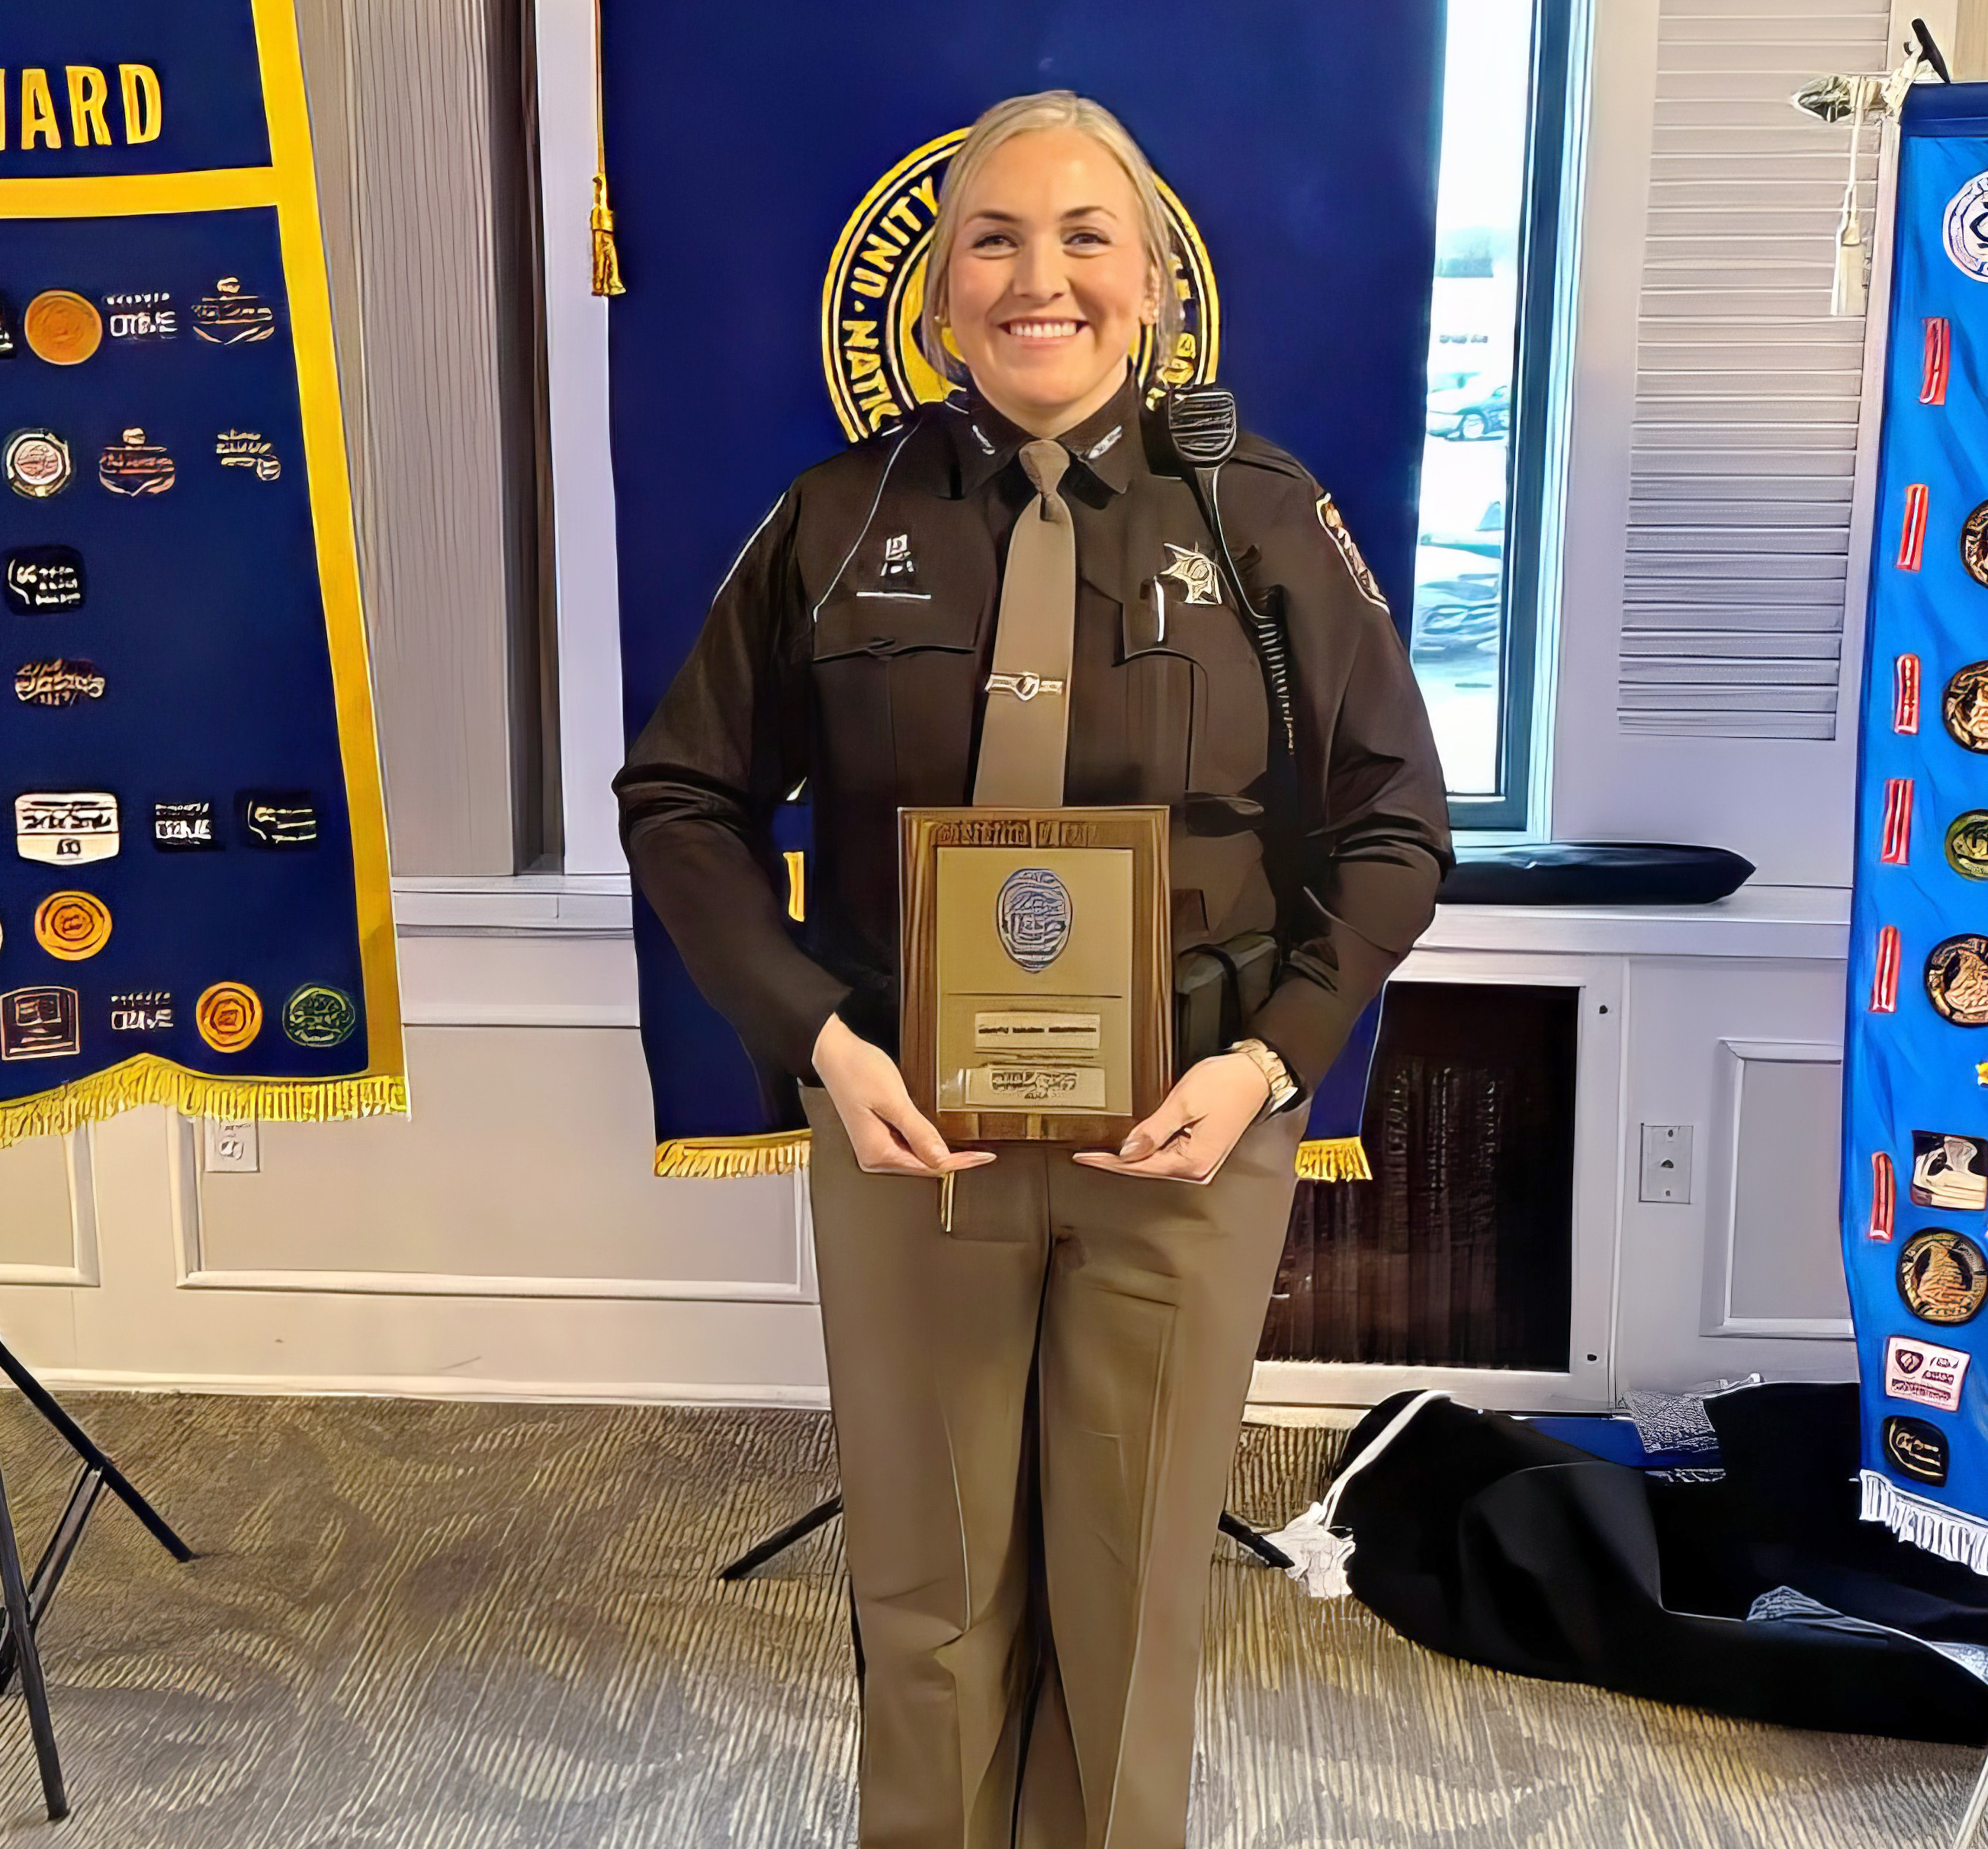 Melissa Henderson, an alumna of Ferris State University’s Criminal Justice Bachelor and Master of Science degree programs, has been honored by the Monroe County Sheriff’s Office, as she was recently named their Deputy of the Year.